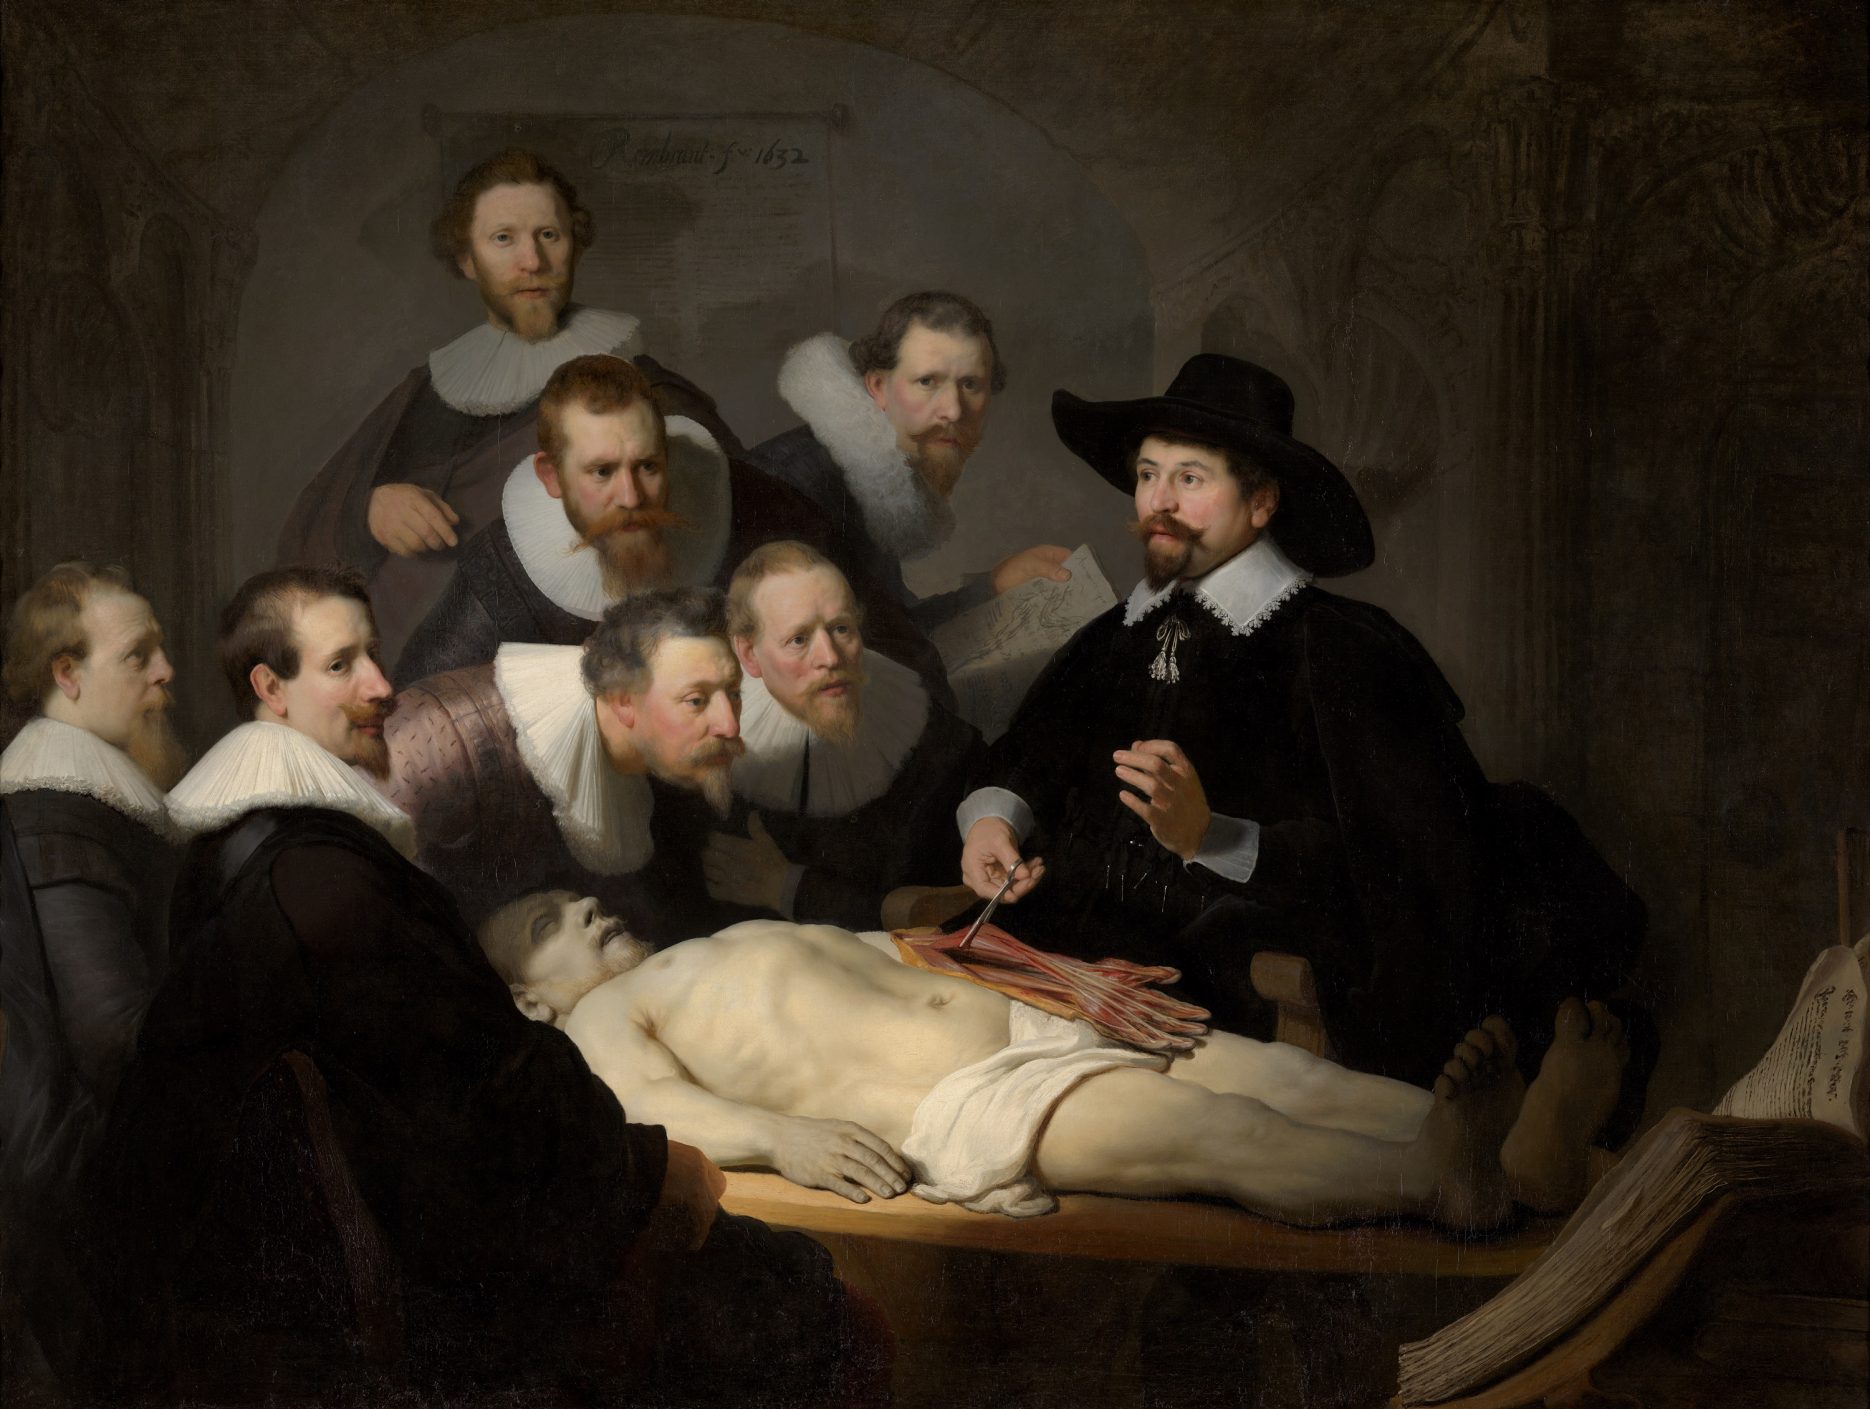 Rembrandt painting anatomy